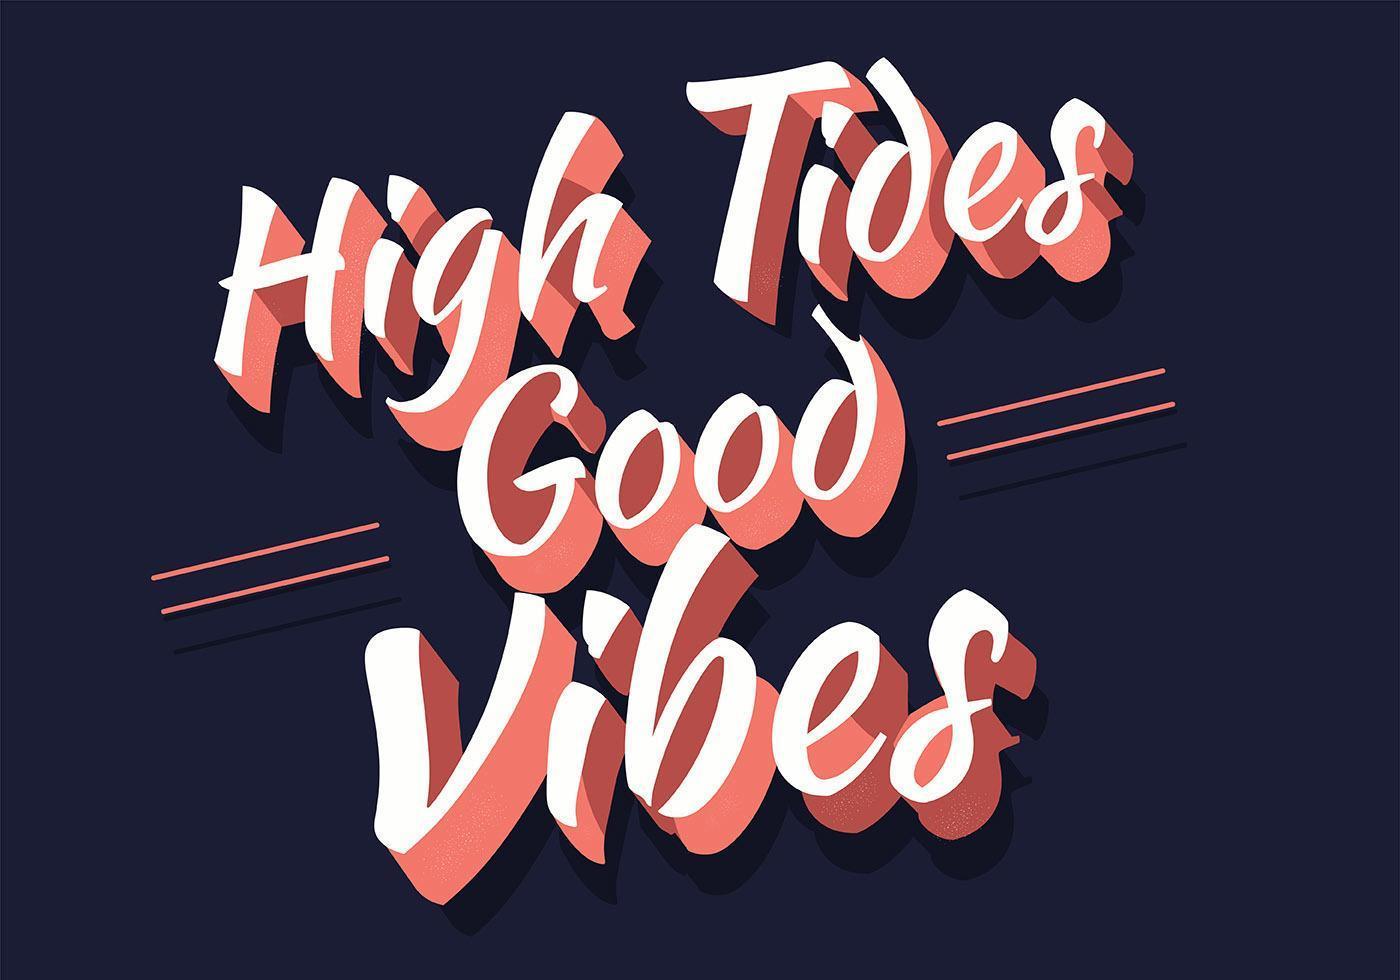 High Tides Good Vibes Lettering vector